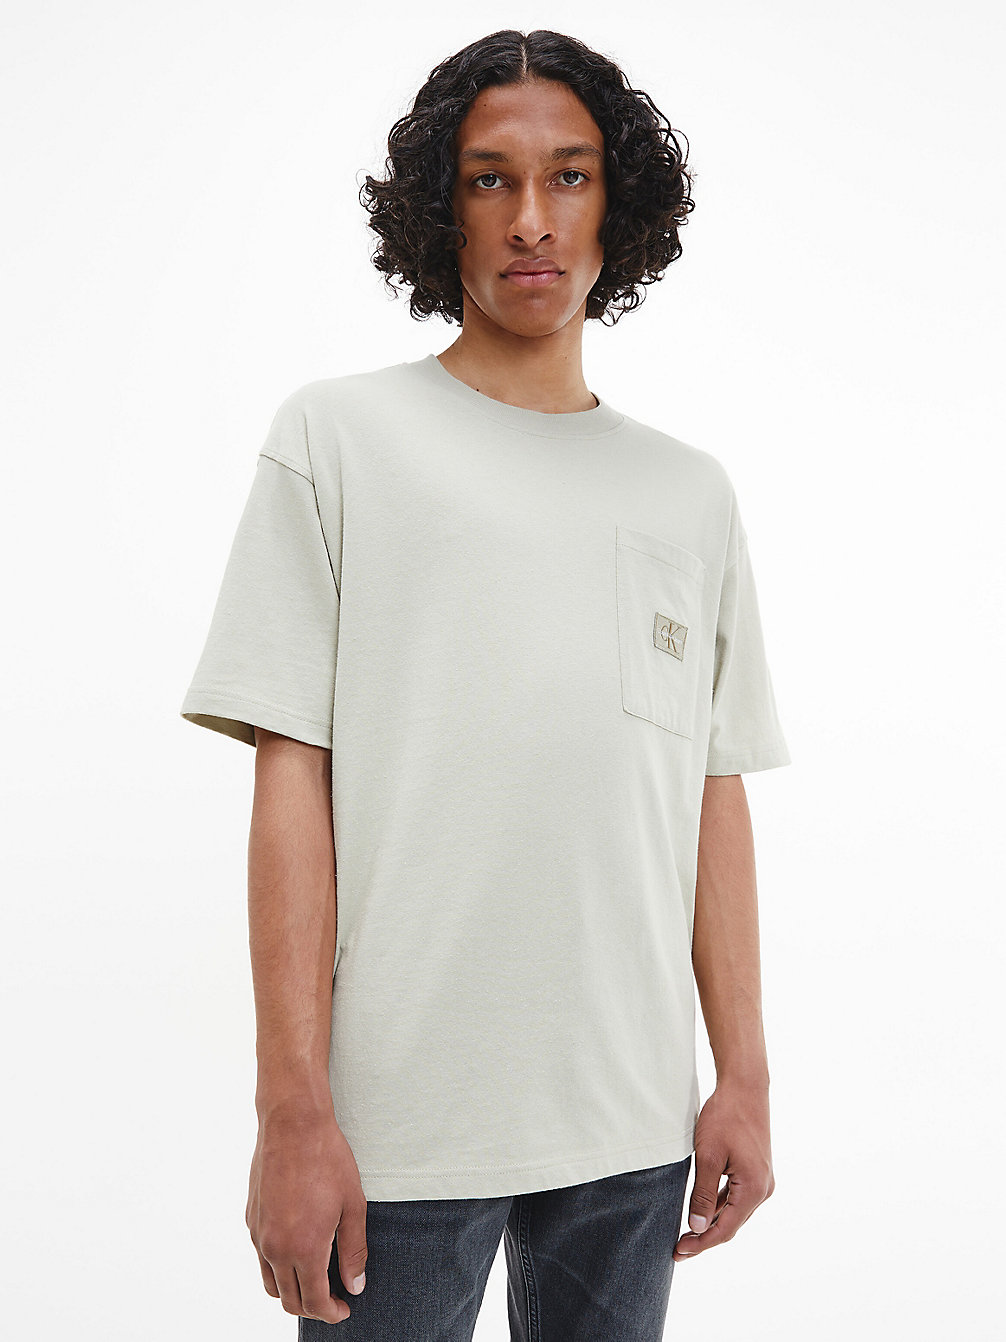 WHEAT FIELDS Oversized Recycled Cotton T-Shirt undefined men Calvin Klein